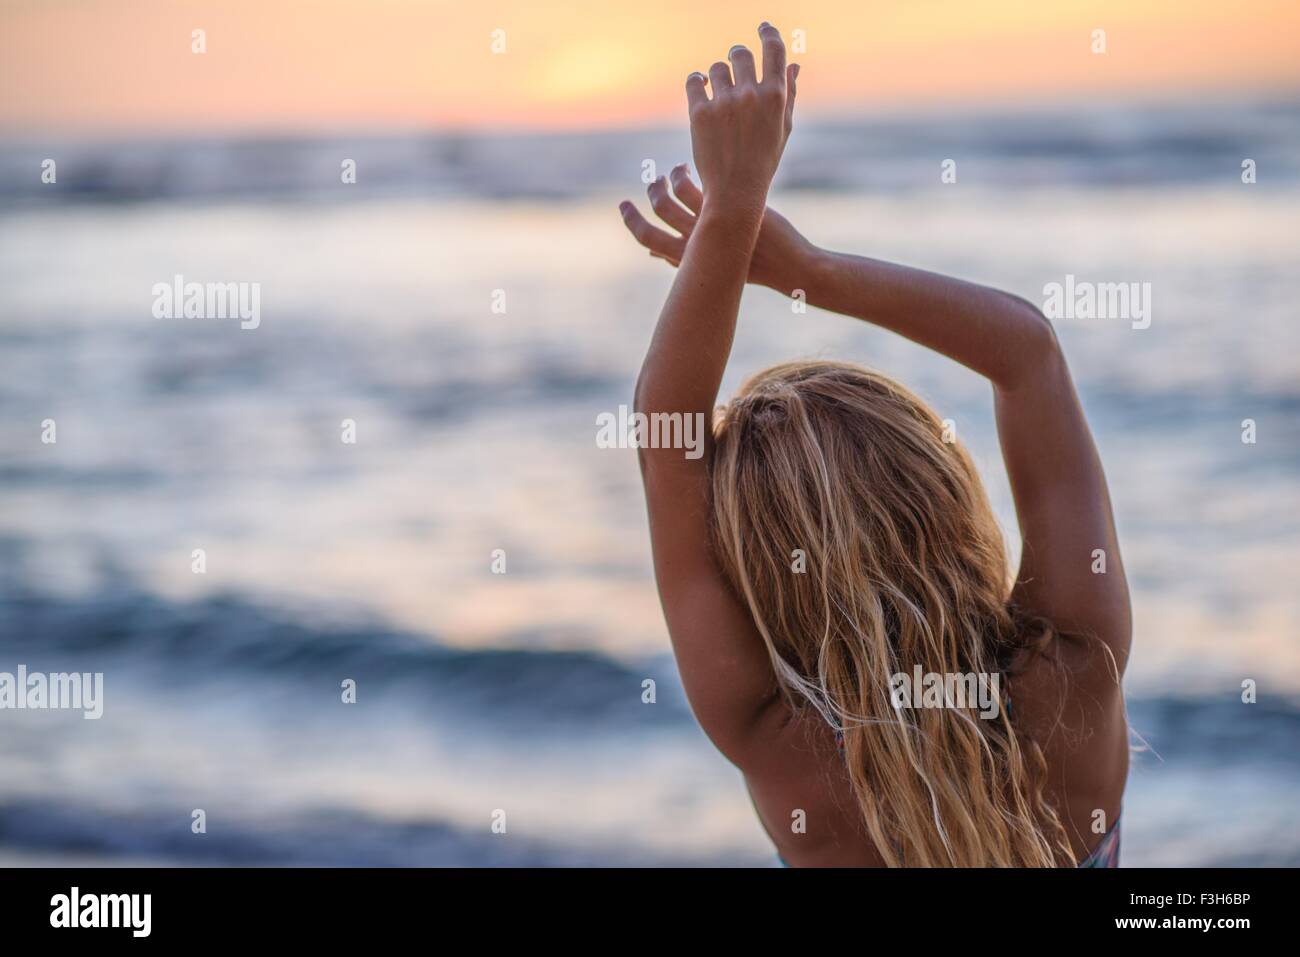 Young woman on beach at sunset Banque D'Images